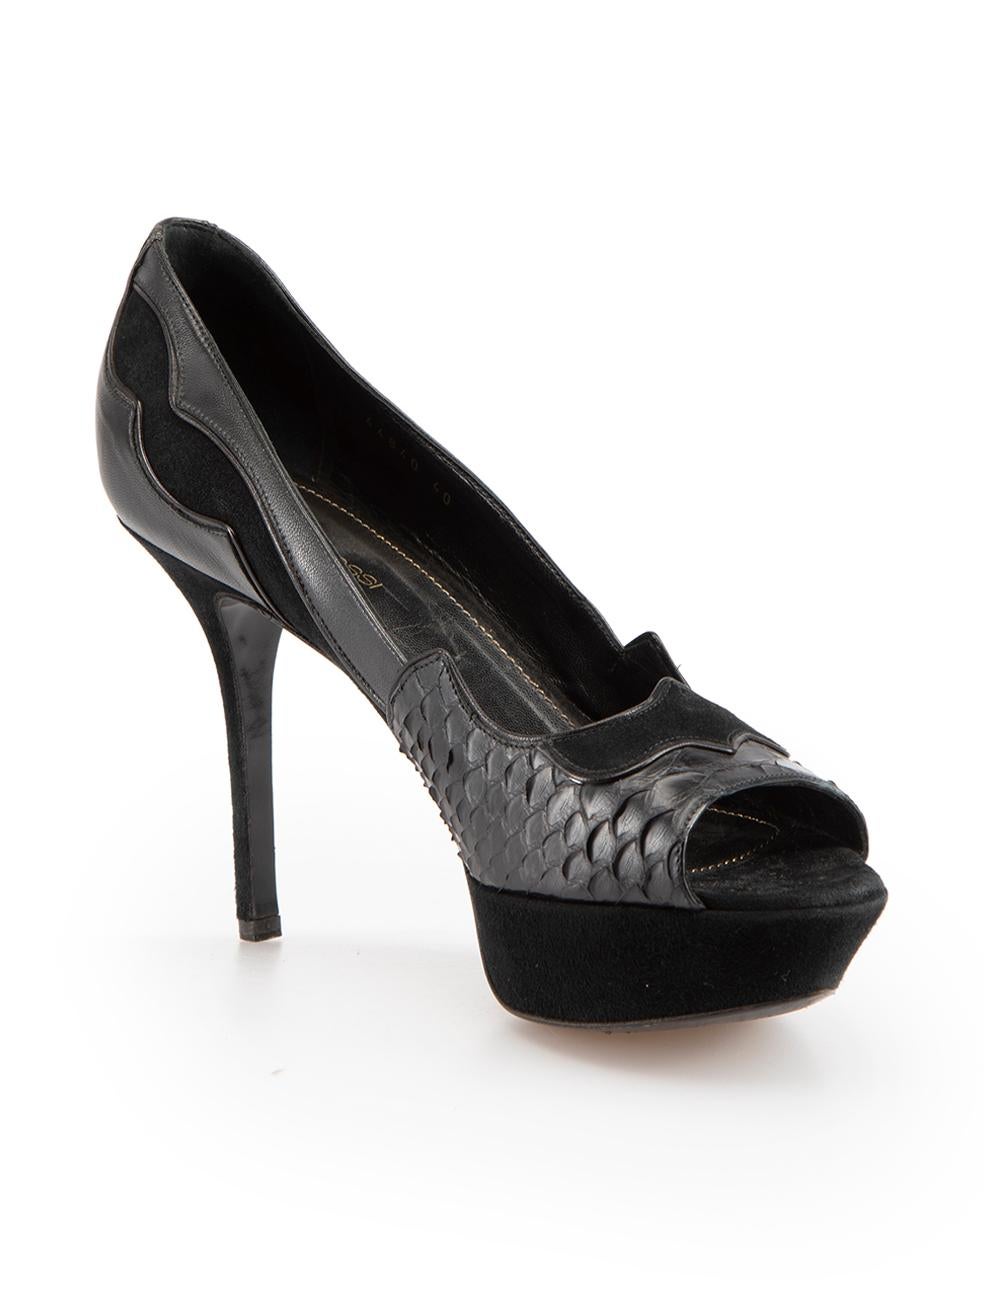 CONDITION is Good. Minor wear to shoes is evident. Light wear to both heel-stems with scuff marks and the right-shoe front trim has come away this used Sergio Rossi designer resale item.



Details


Black

Leather

Slip-on heels

Python, suede and